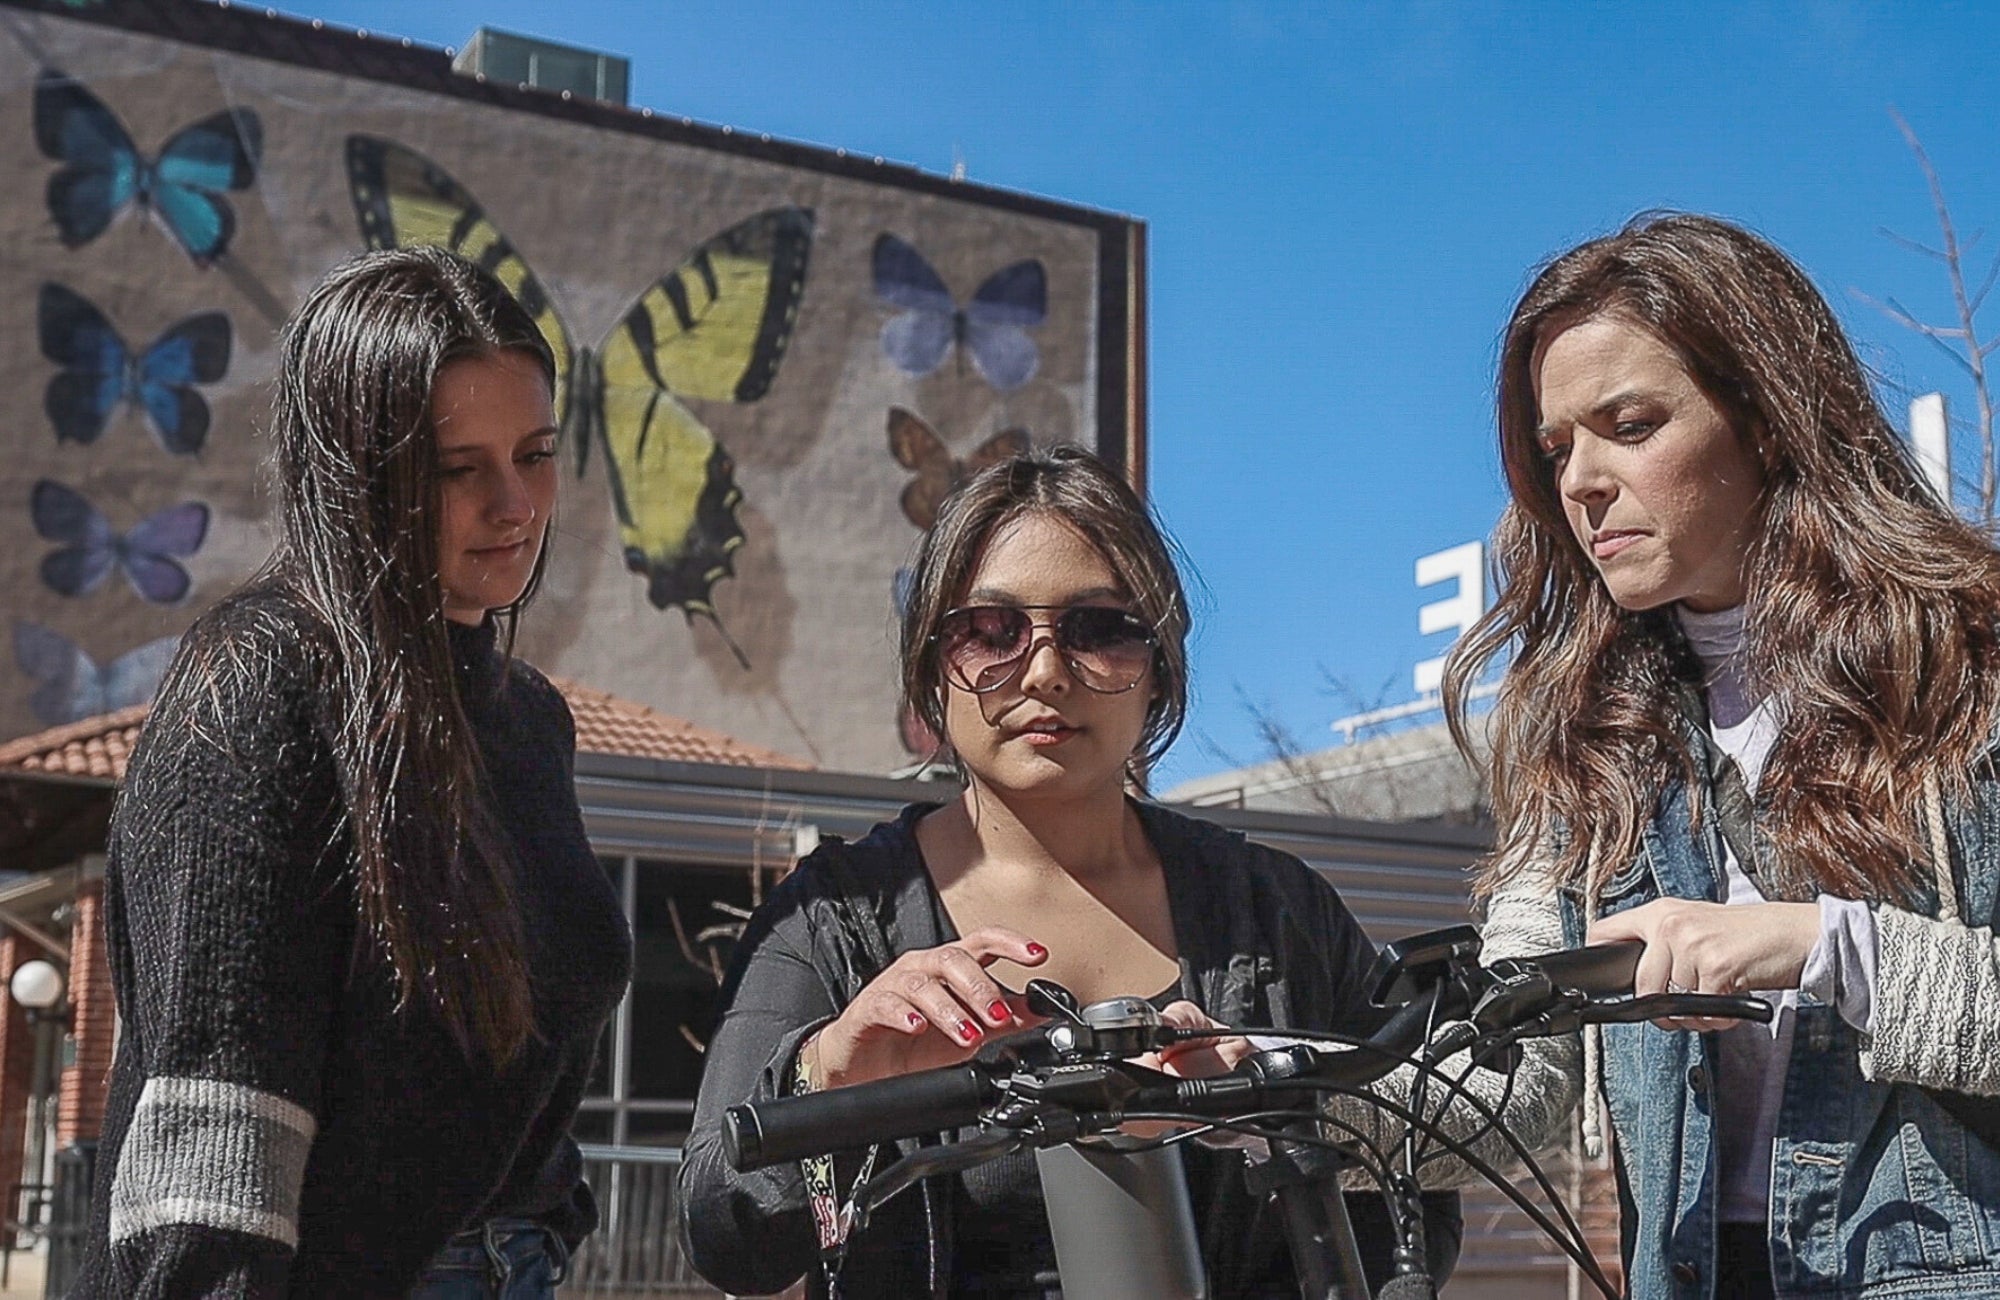 Three woman looking at an Emerald Ebike discussing it